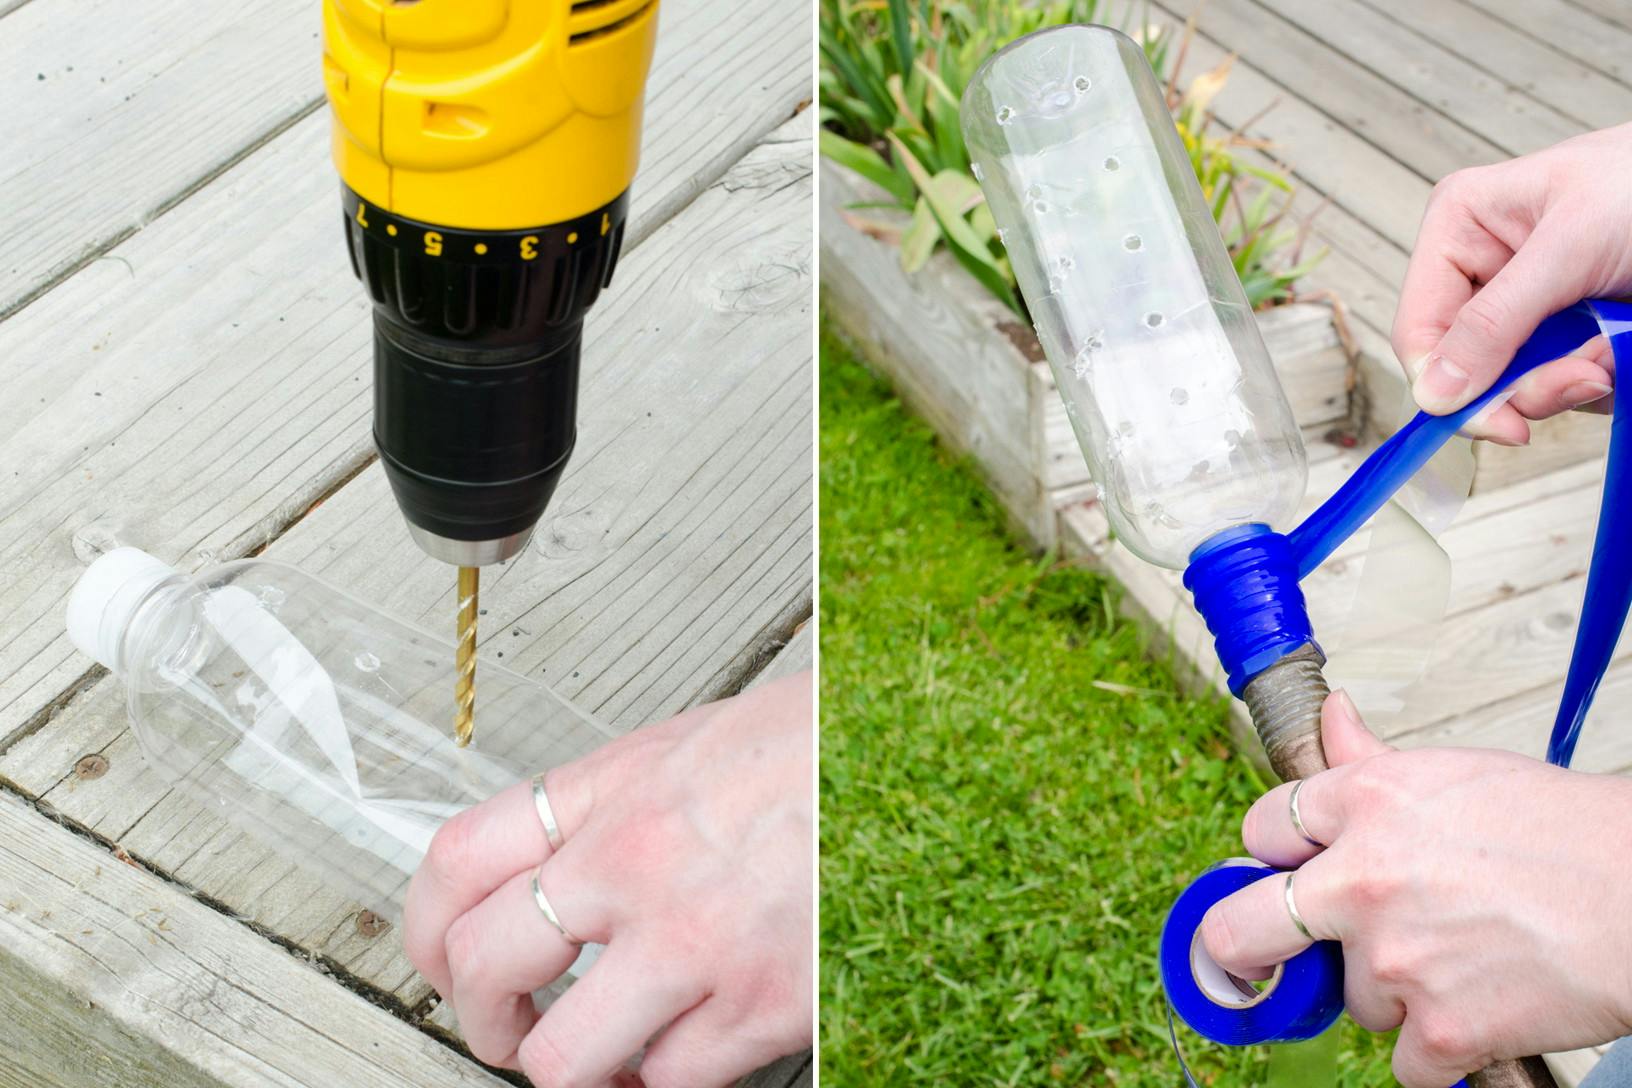 Someone drilling holes in an empty water bottle, then using waterproof tape to attach to a hose.